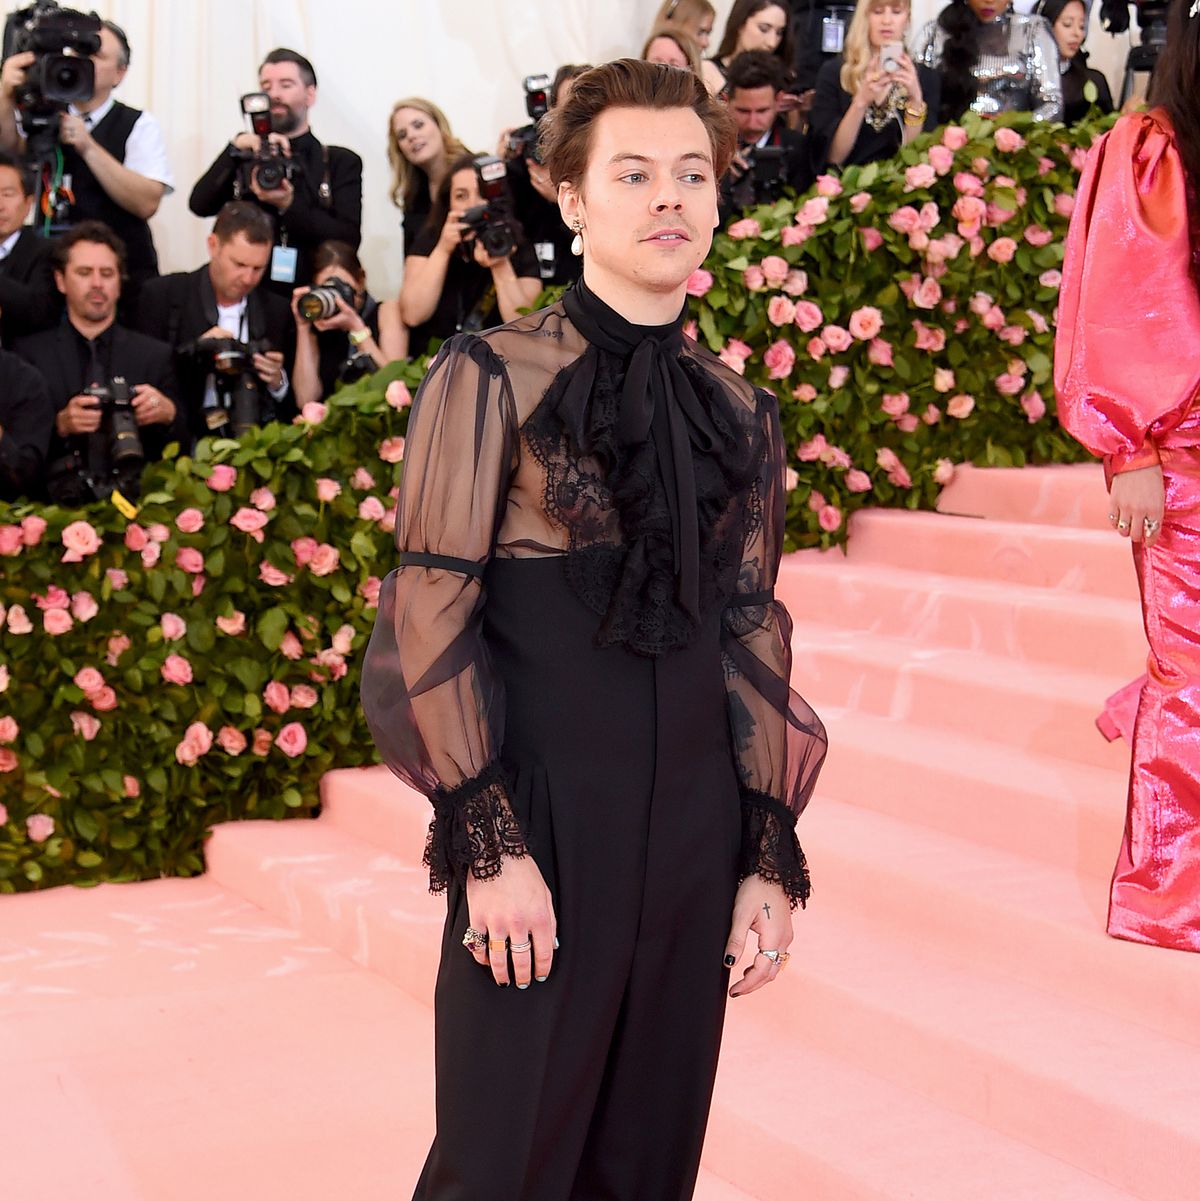 Harry Styles Met Gala 2019 - Harry Styles Met Gala Fan Reactions